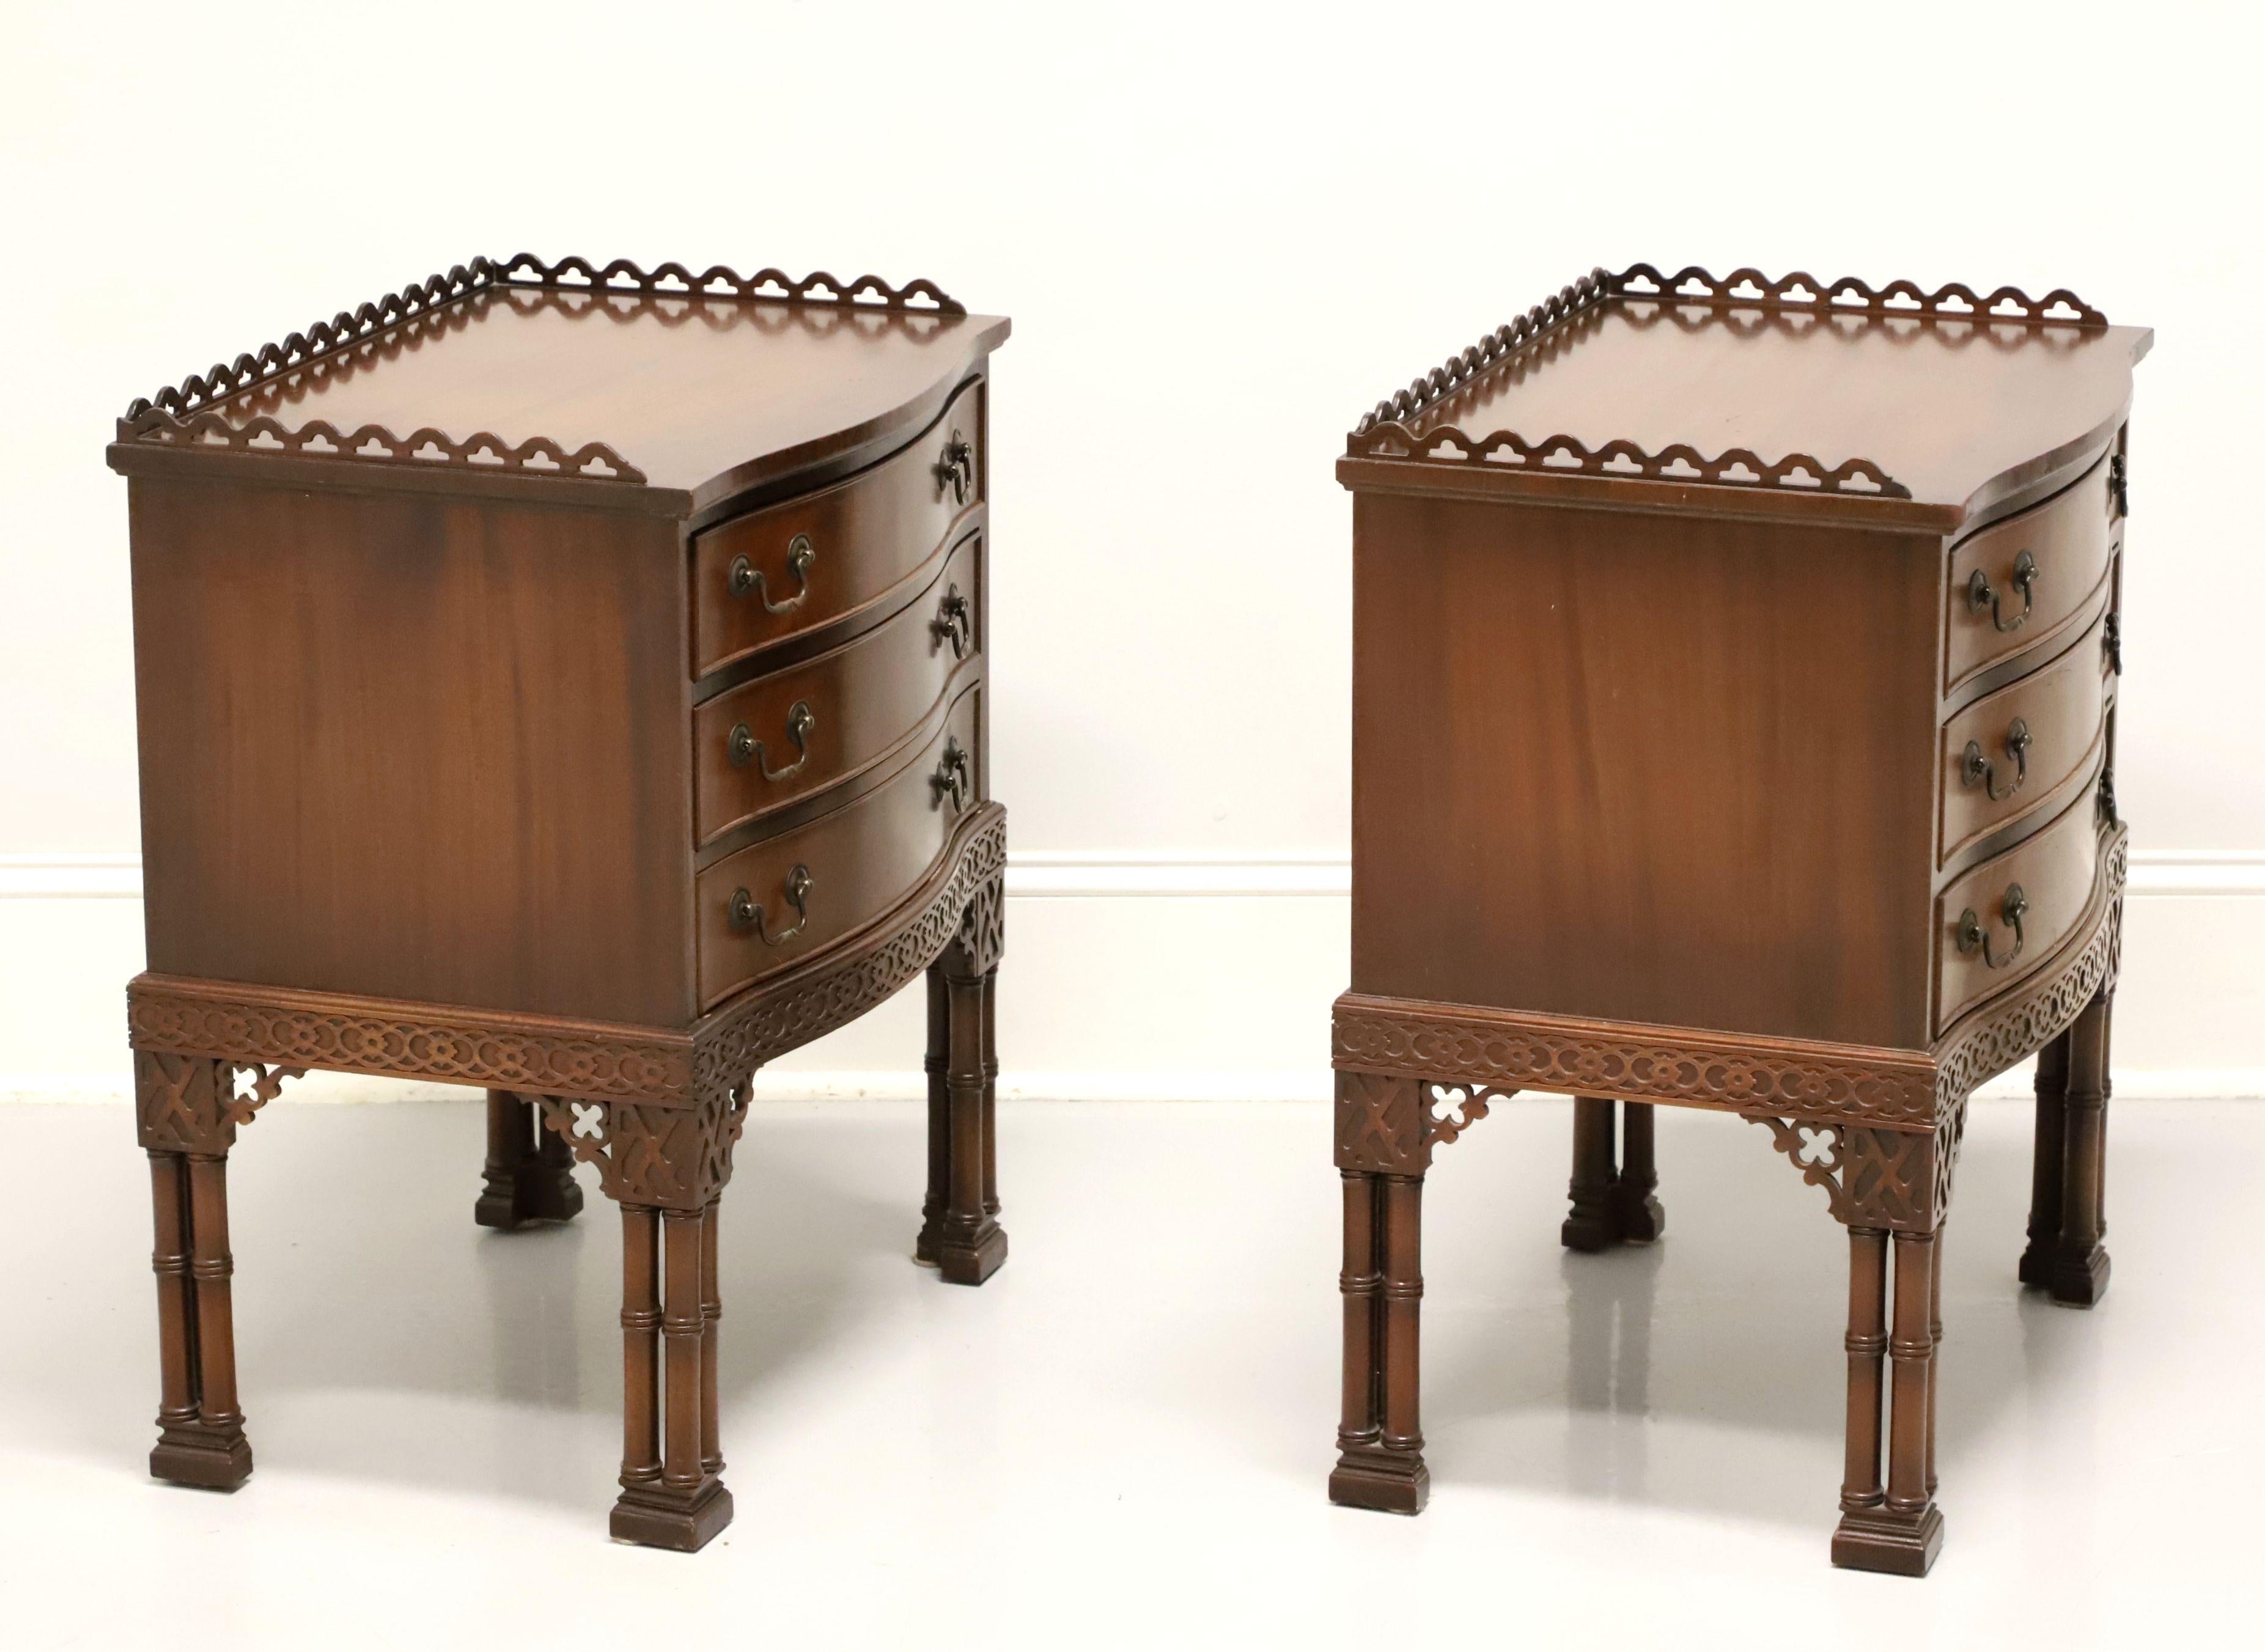 A pair of Chinese Chippendale style bedside chests by Warsaw Furniture Manufacturing Co. Mahogany with fretwork gallery, fretwork accents to apron & legs, bamboo like legs and block feet. Features the upper gallery and three drawers with brass